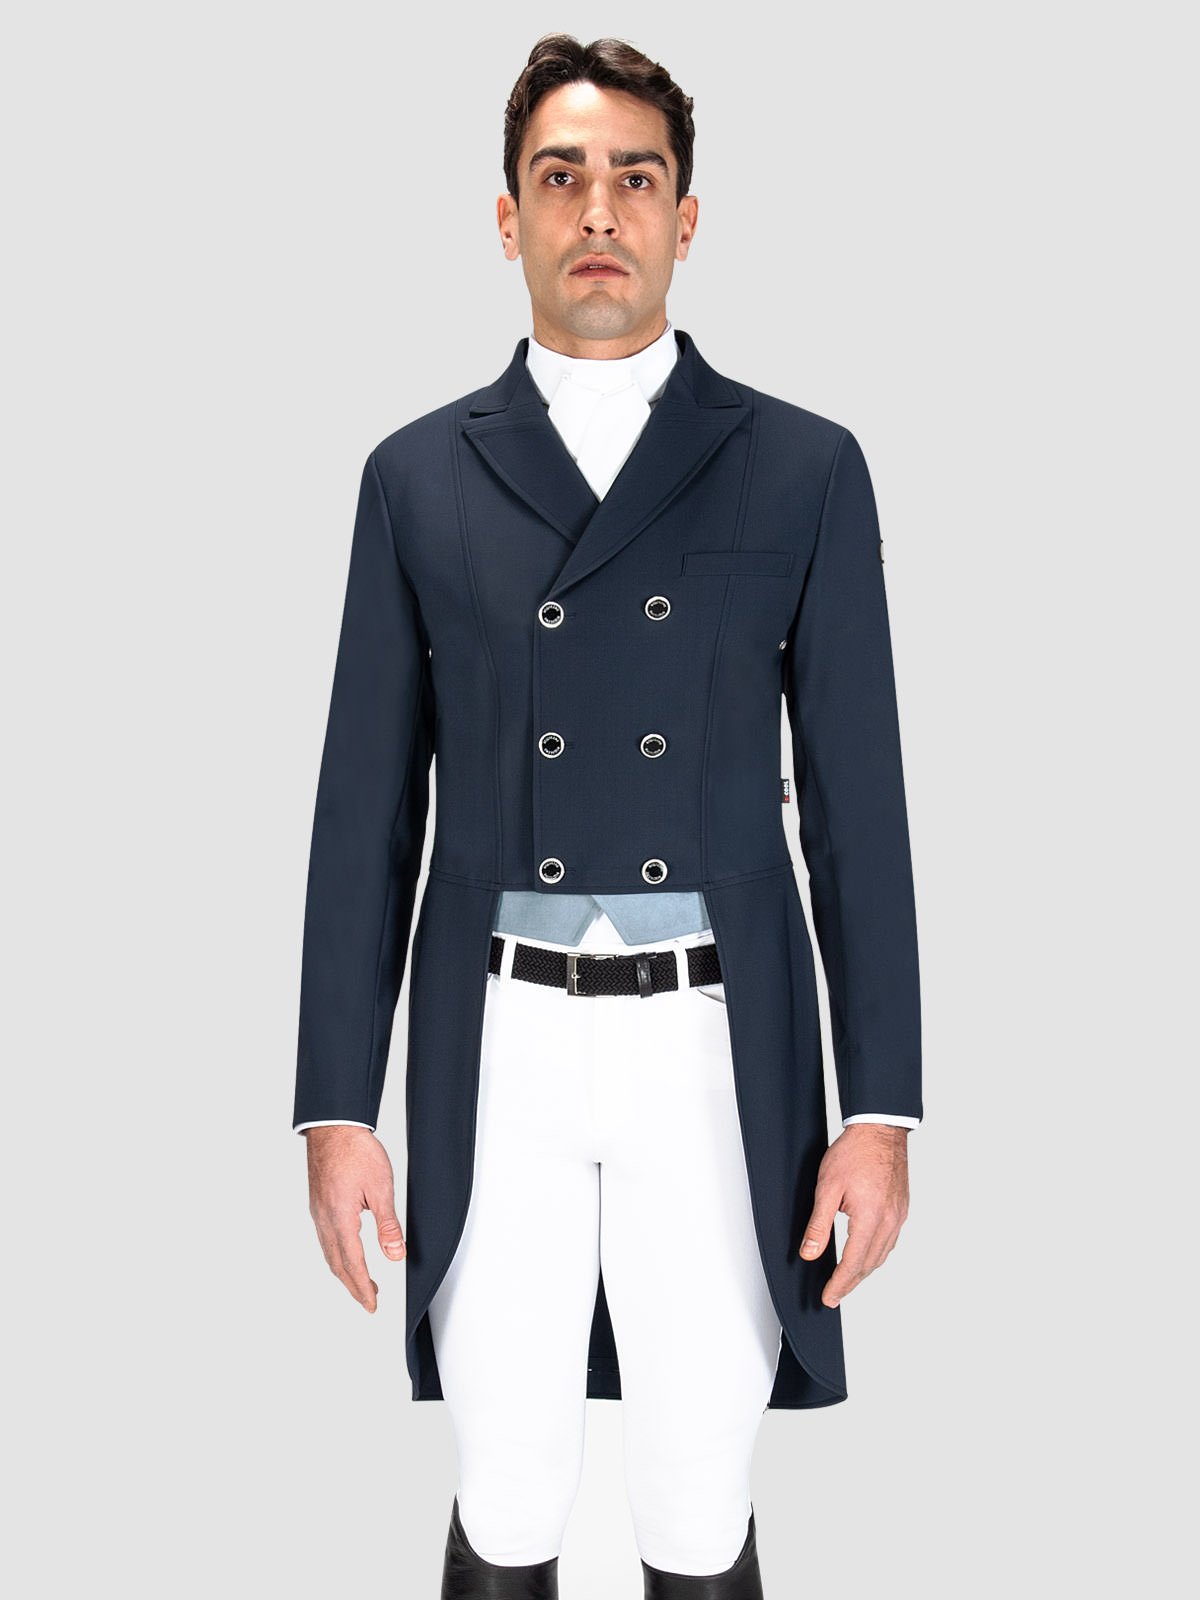 Equiline Canter Men's dressage tailcoat in blue